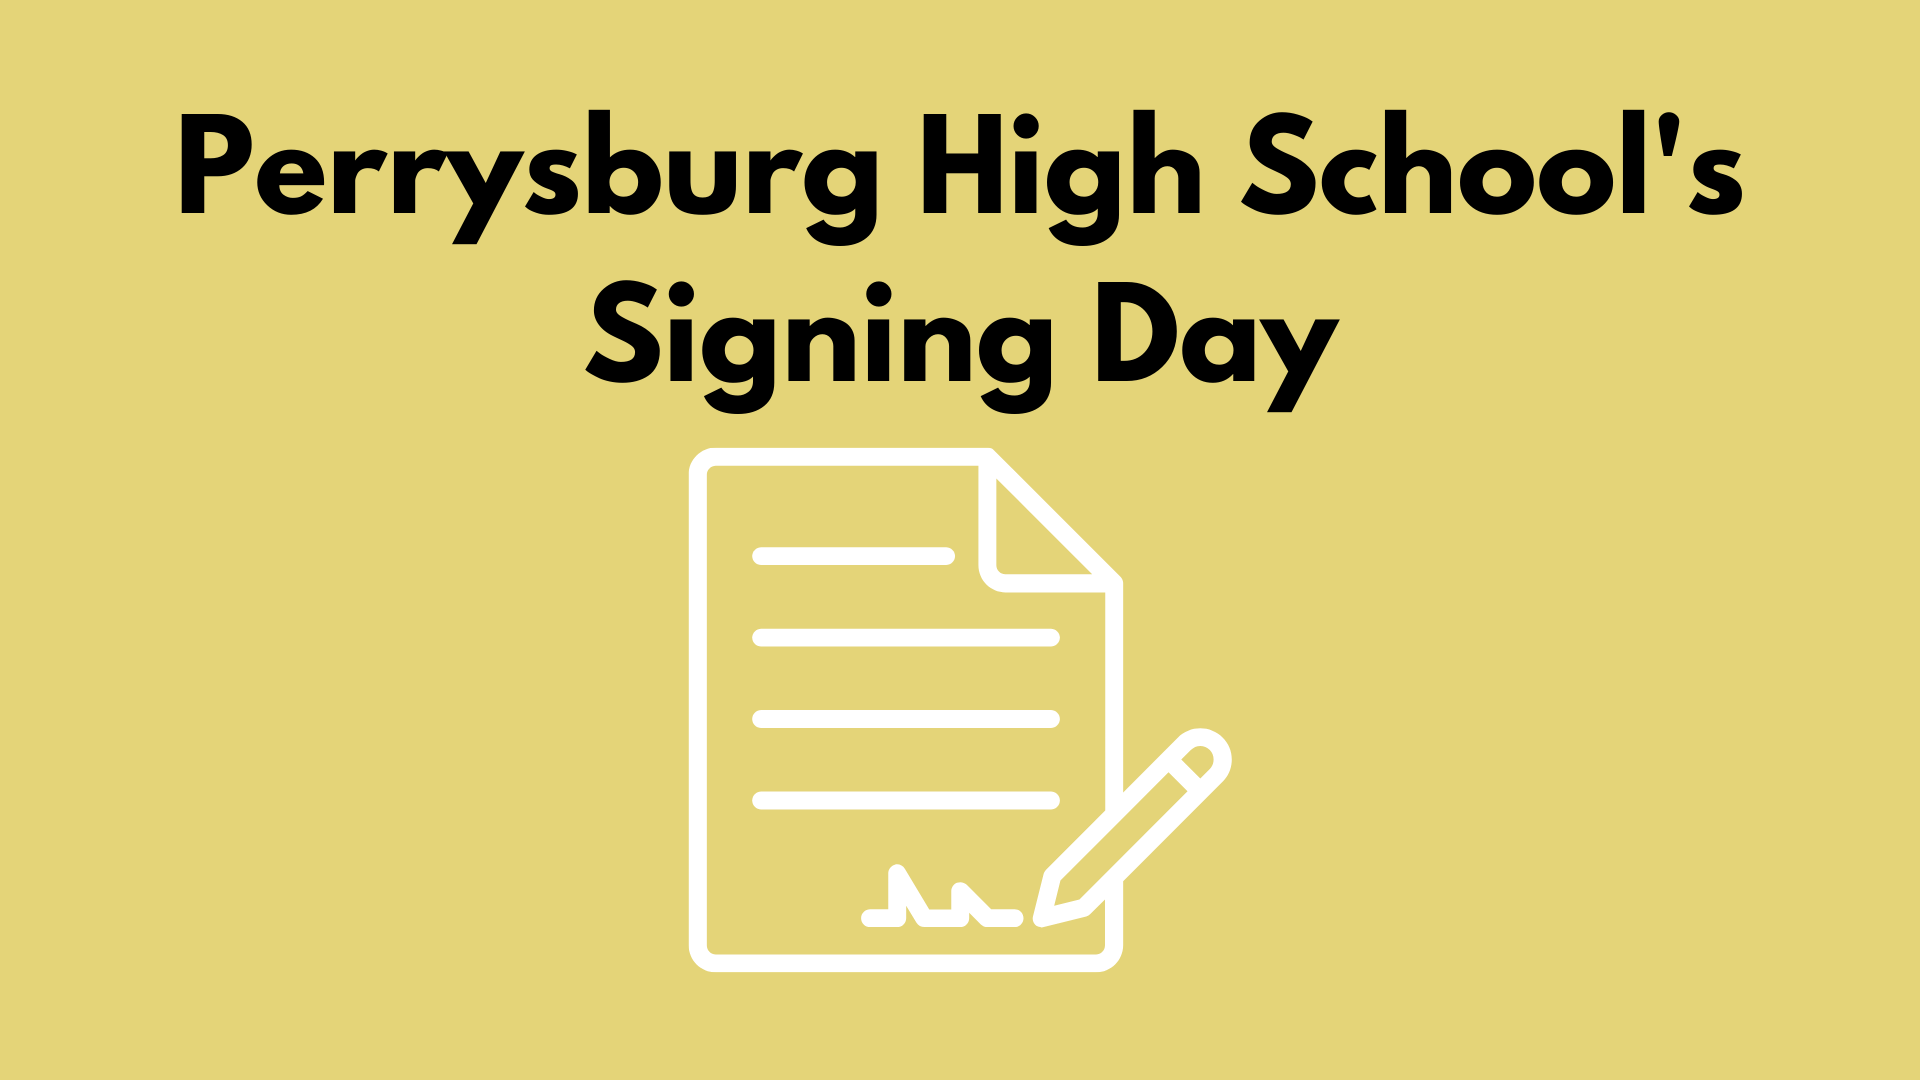 Perrysburg High School host the first signing day for class of 2022